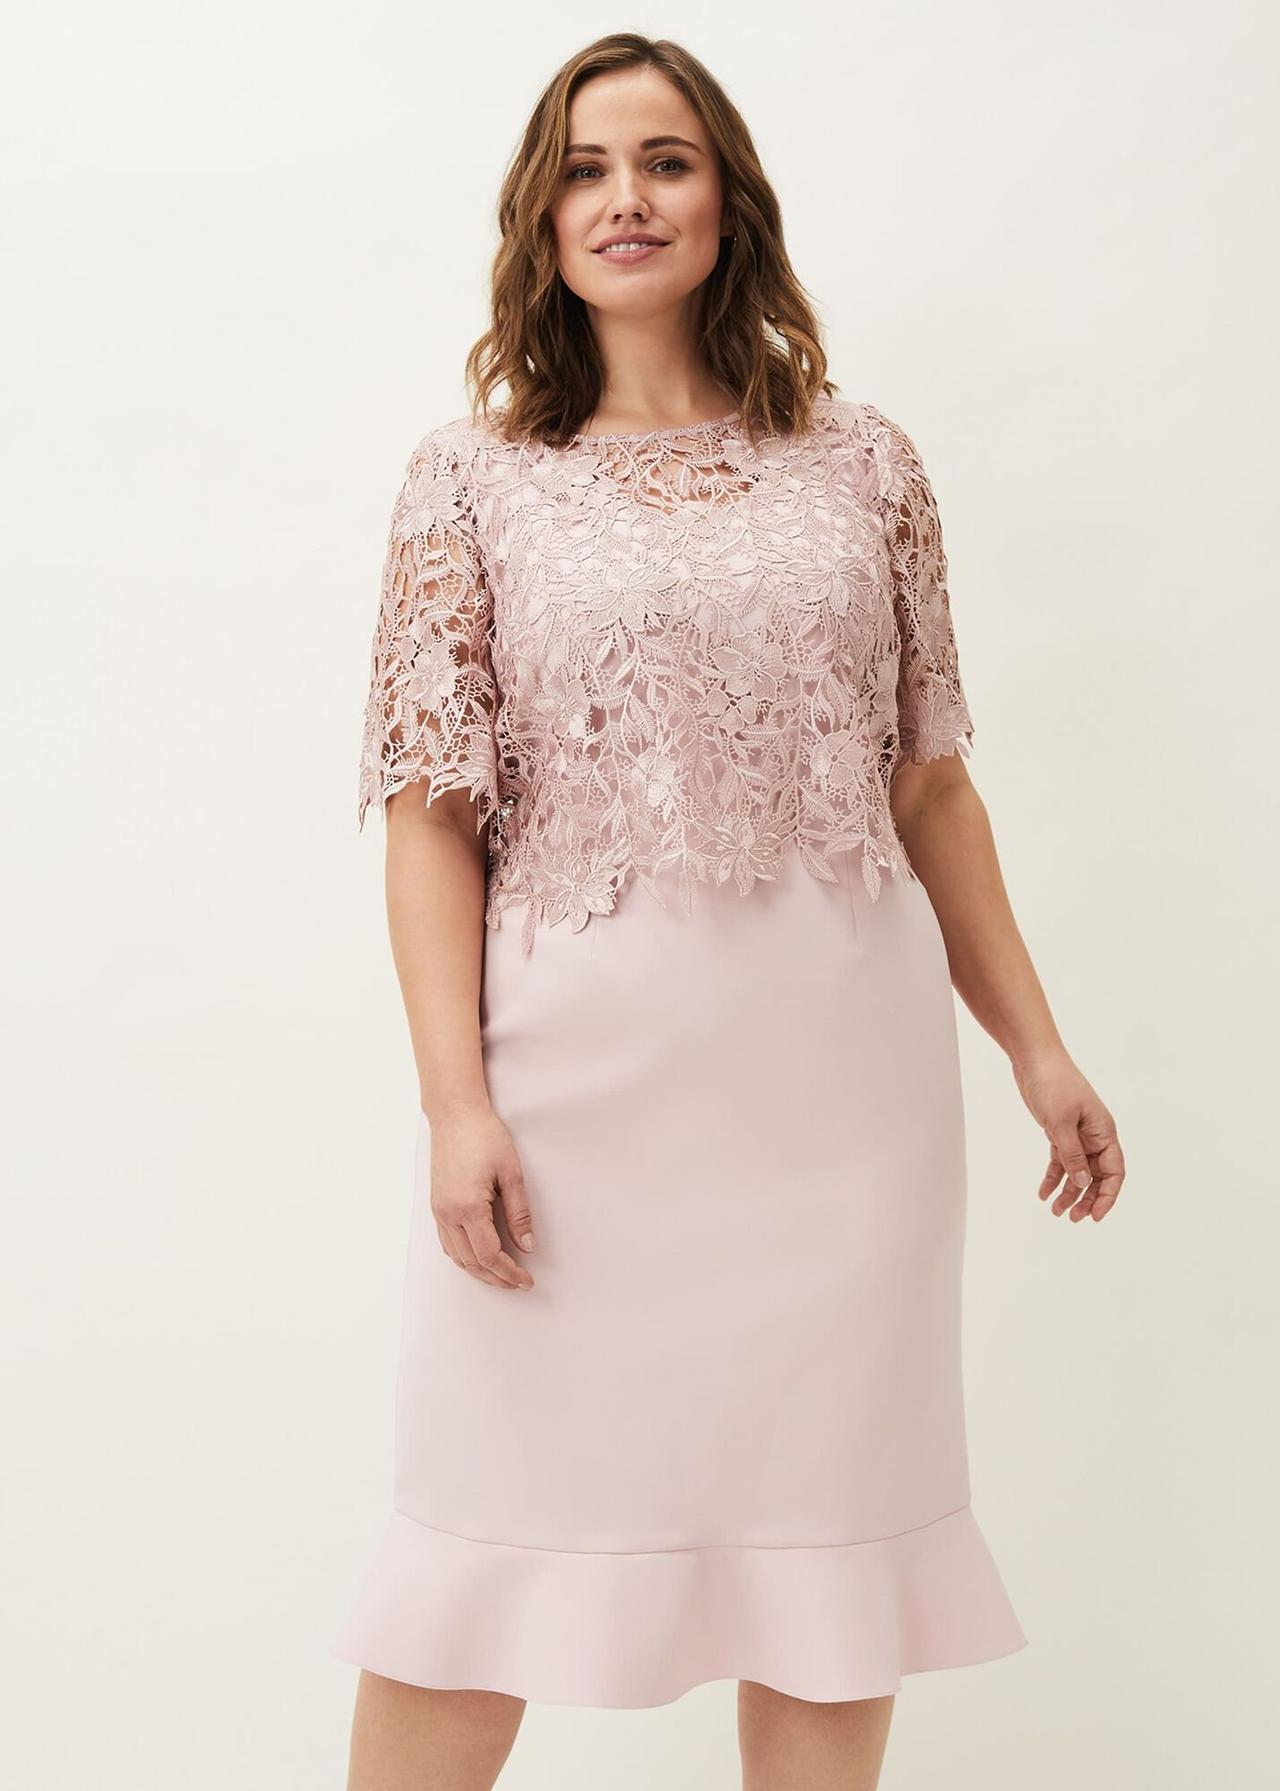 25 Plus Size Mother of the Outfits & Dresses 2021 - hitched.co.uk